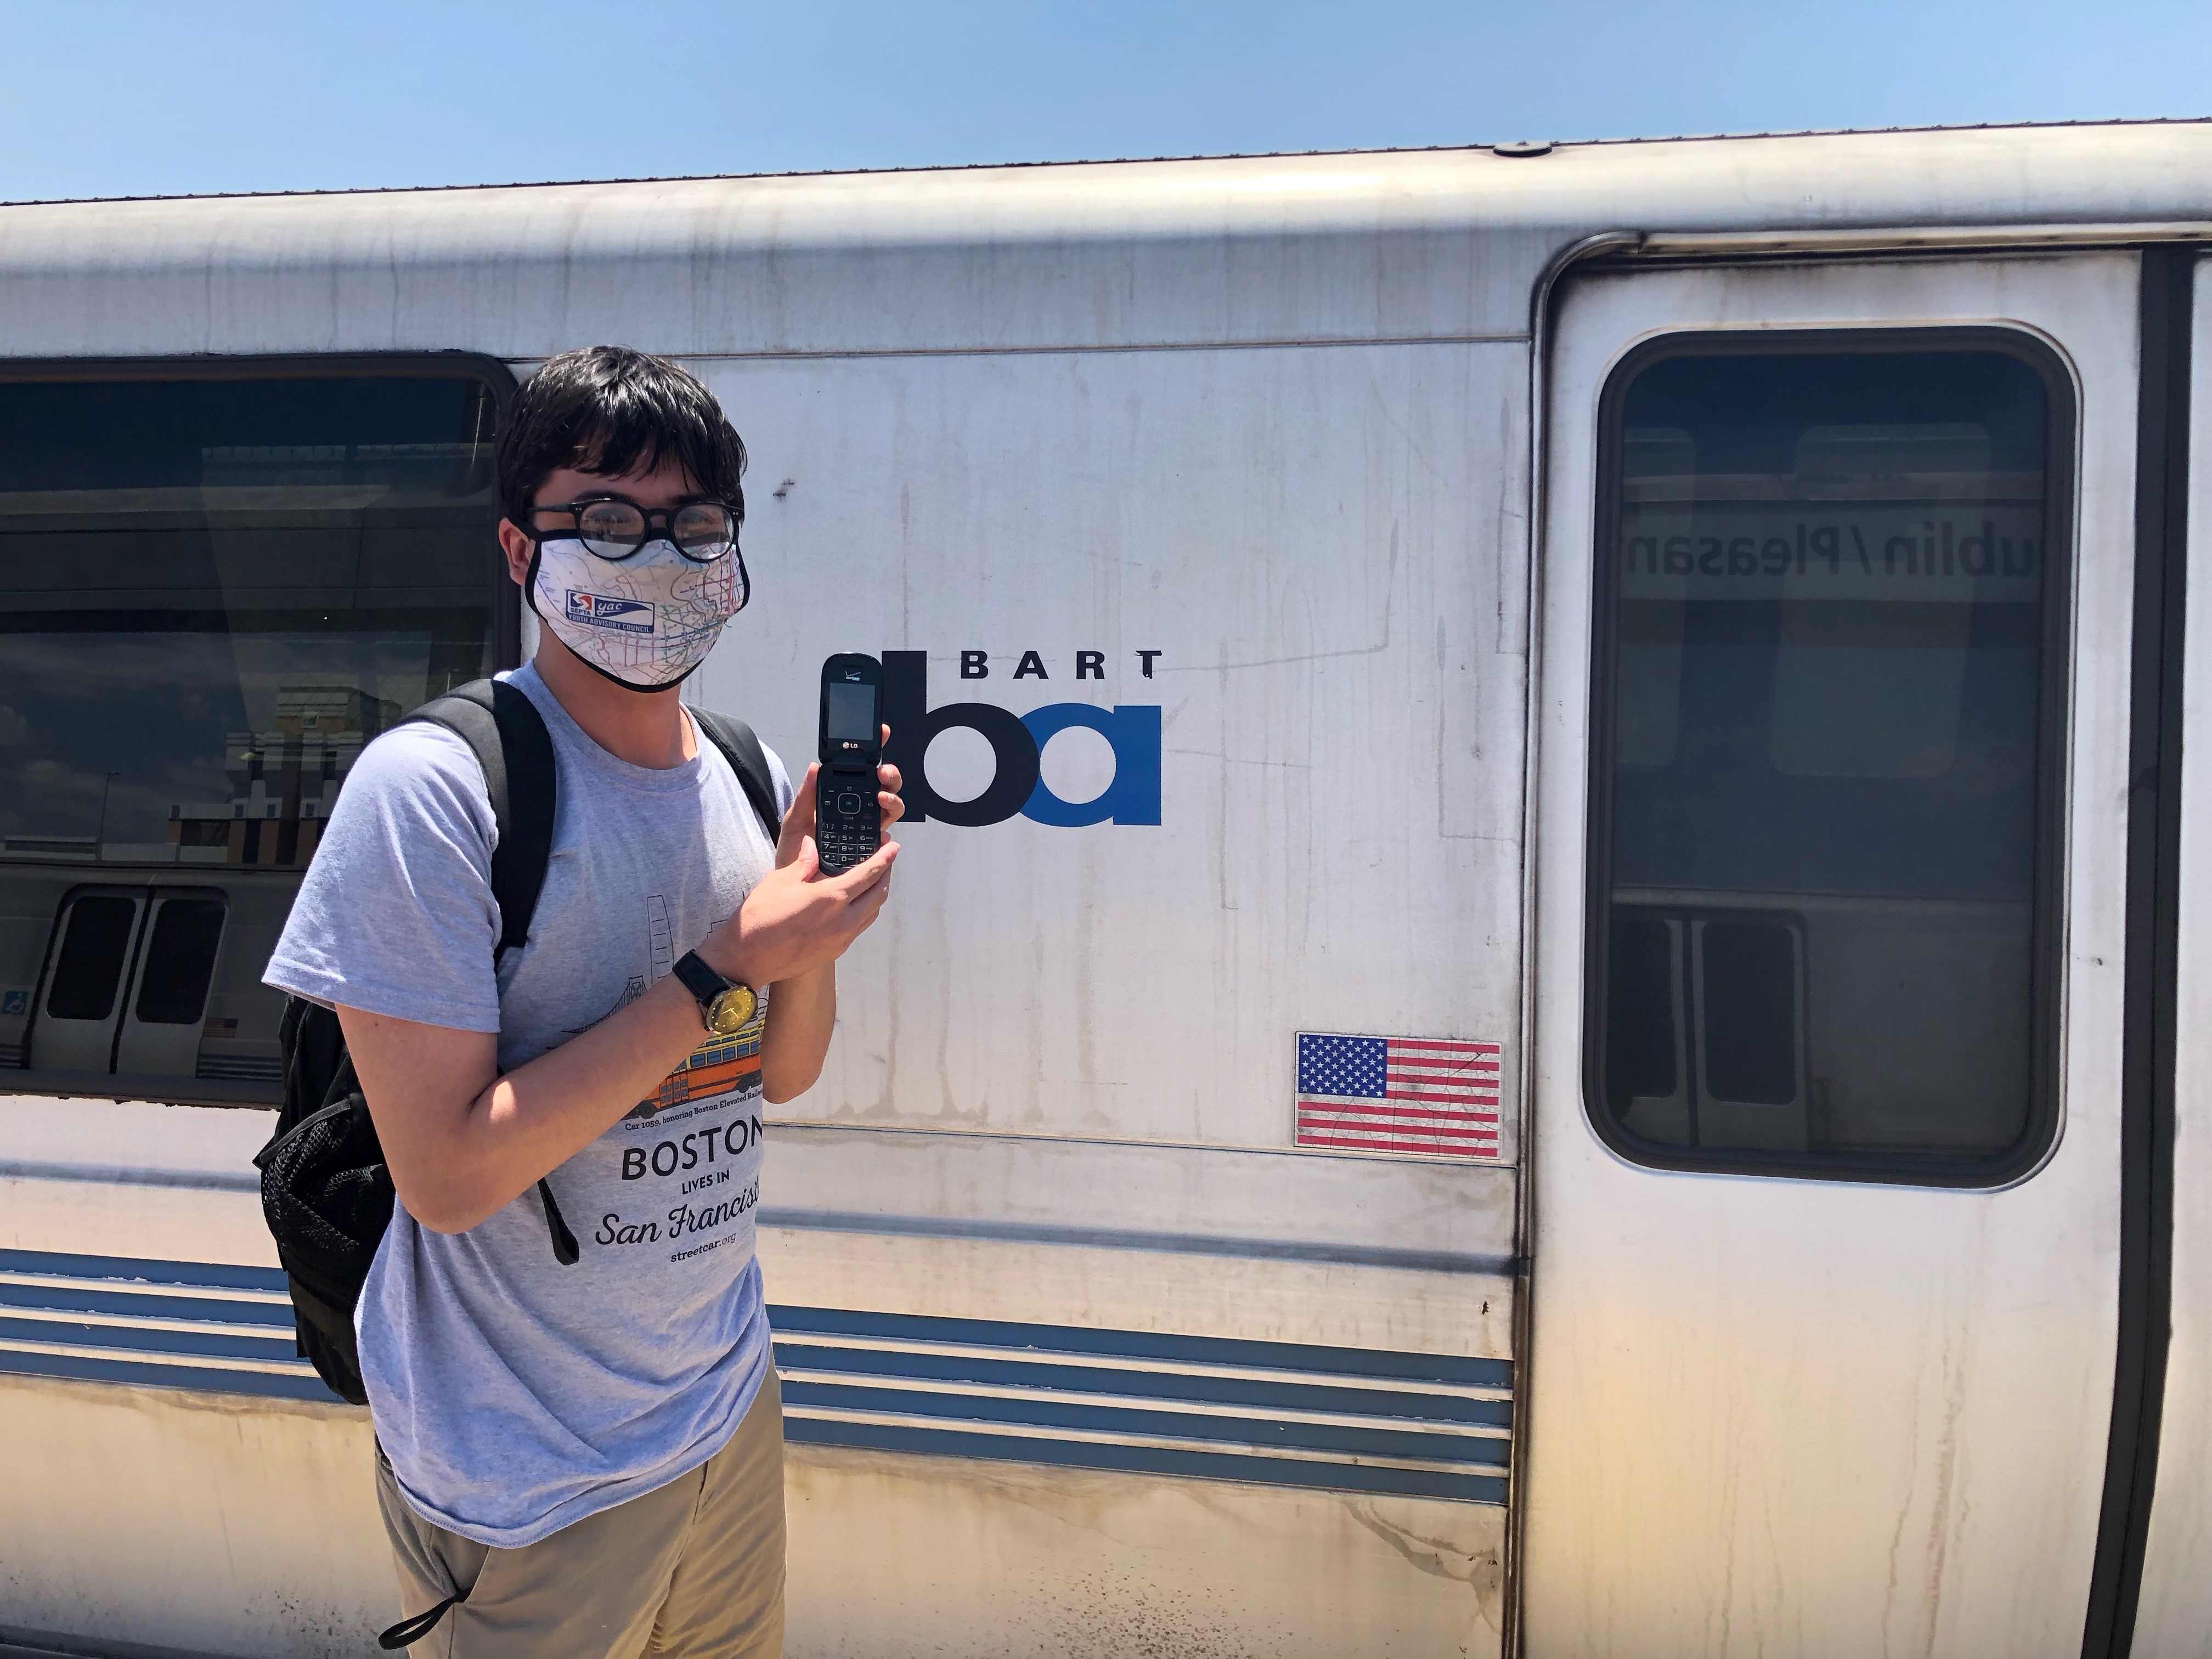 Miles Taylor poses in front of a BART train after completing his speed ru